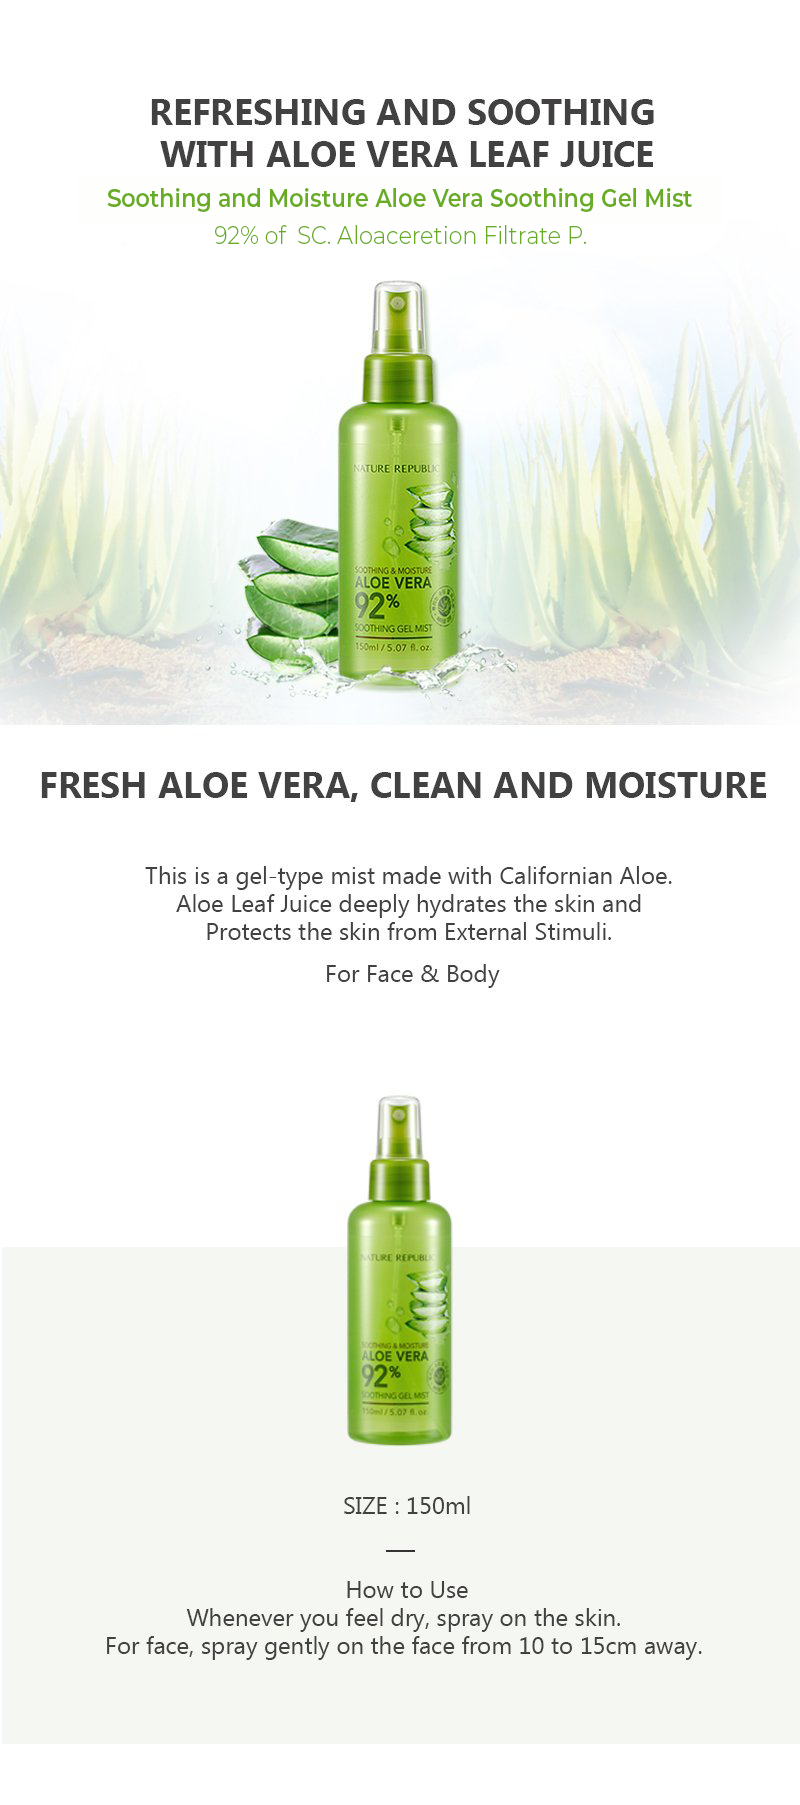 SOOTHING & MOISTURE ALOE VERA SOOTHING GEL MIST – Nature Republic USA Official